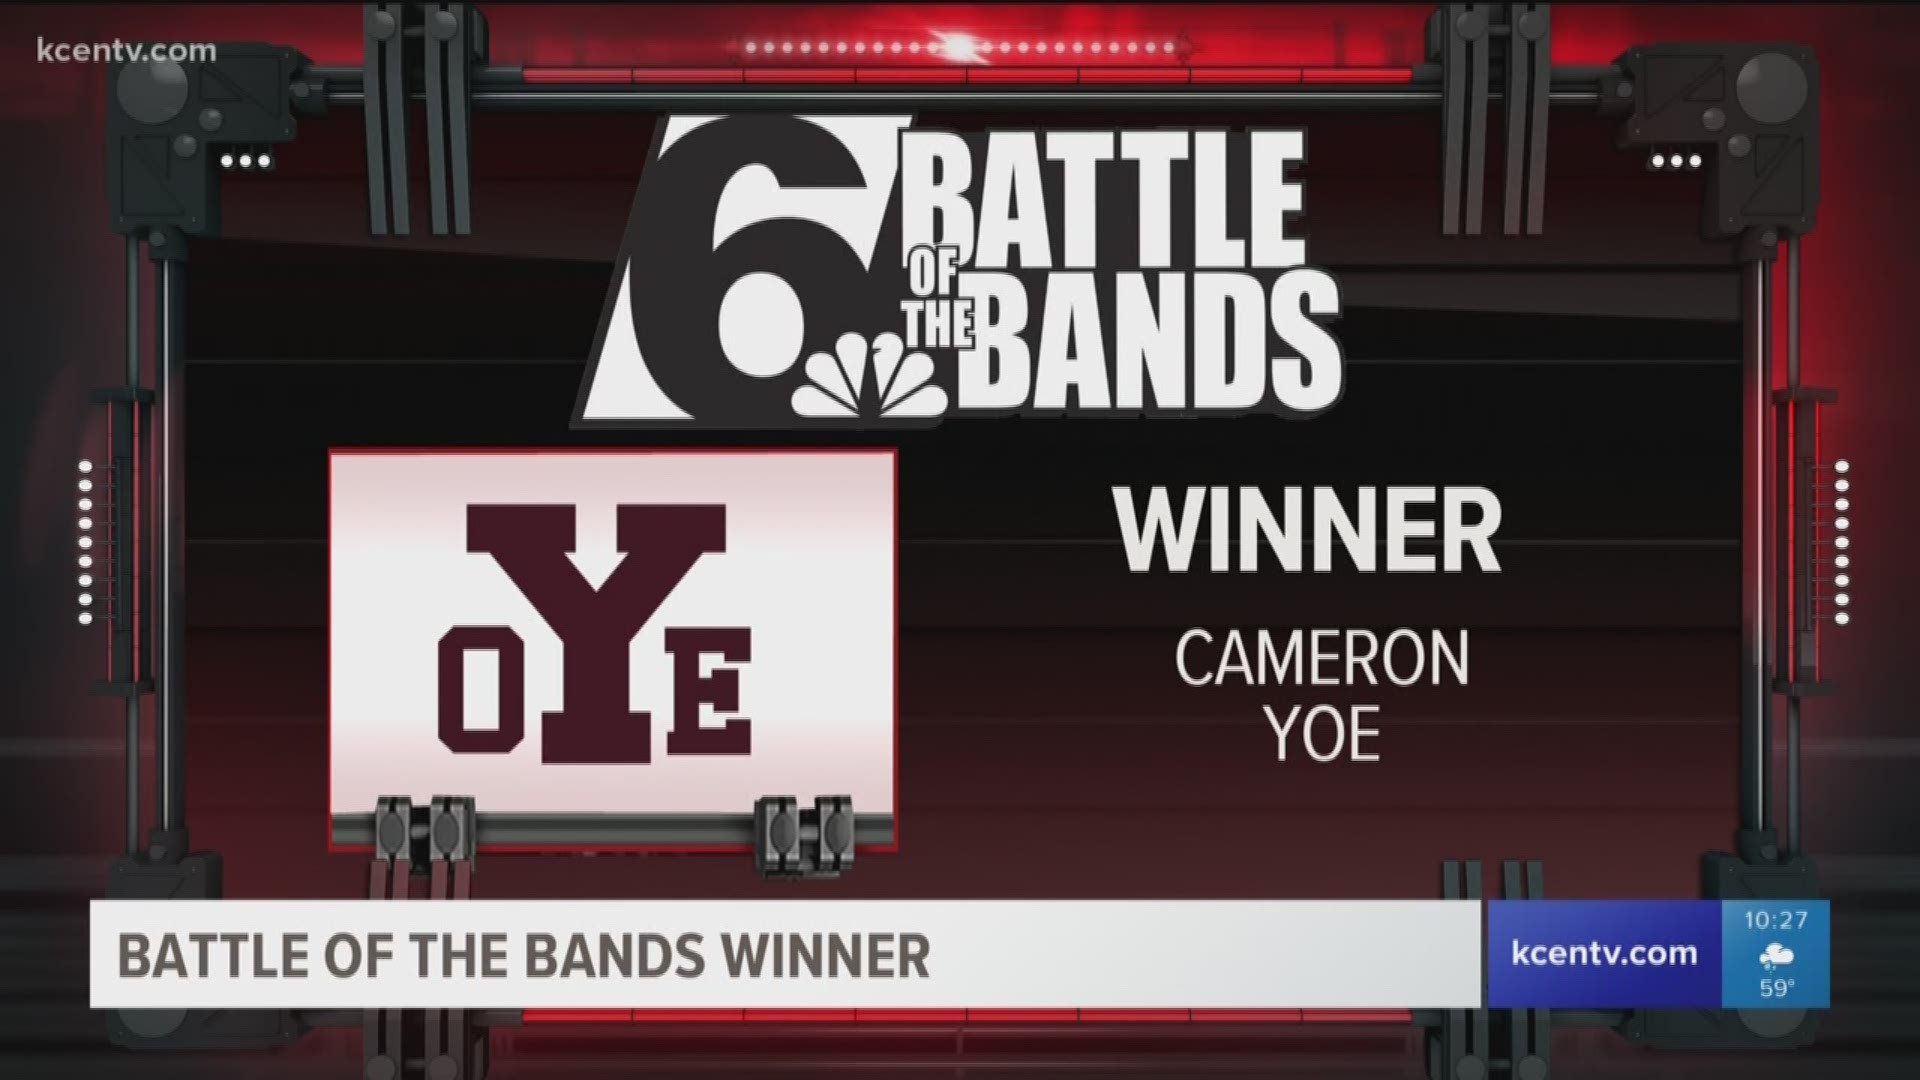 Cameron Yoe received the Battle of the Bands trophy for its win in Week eight.